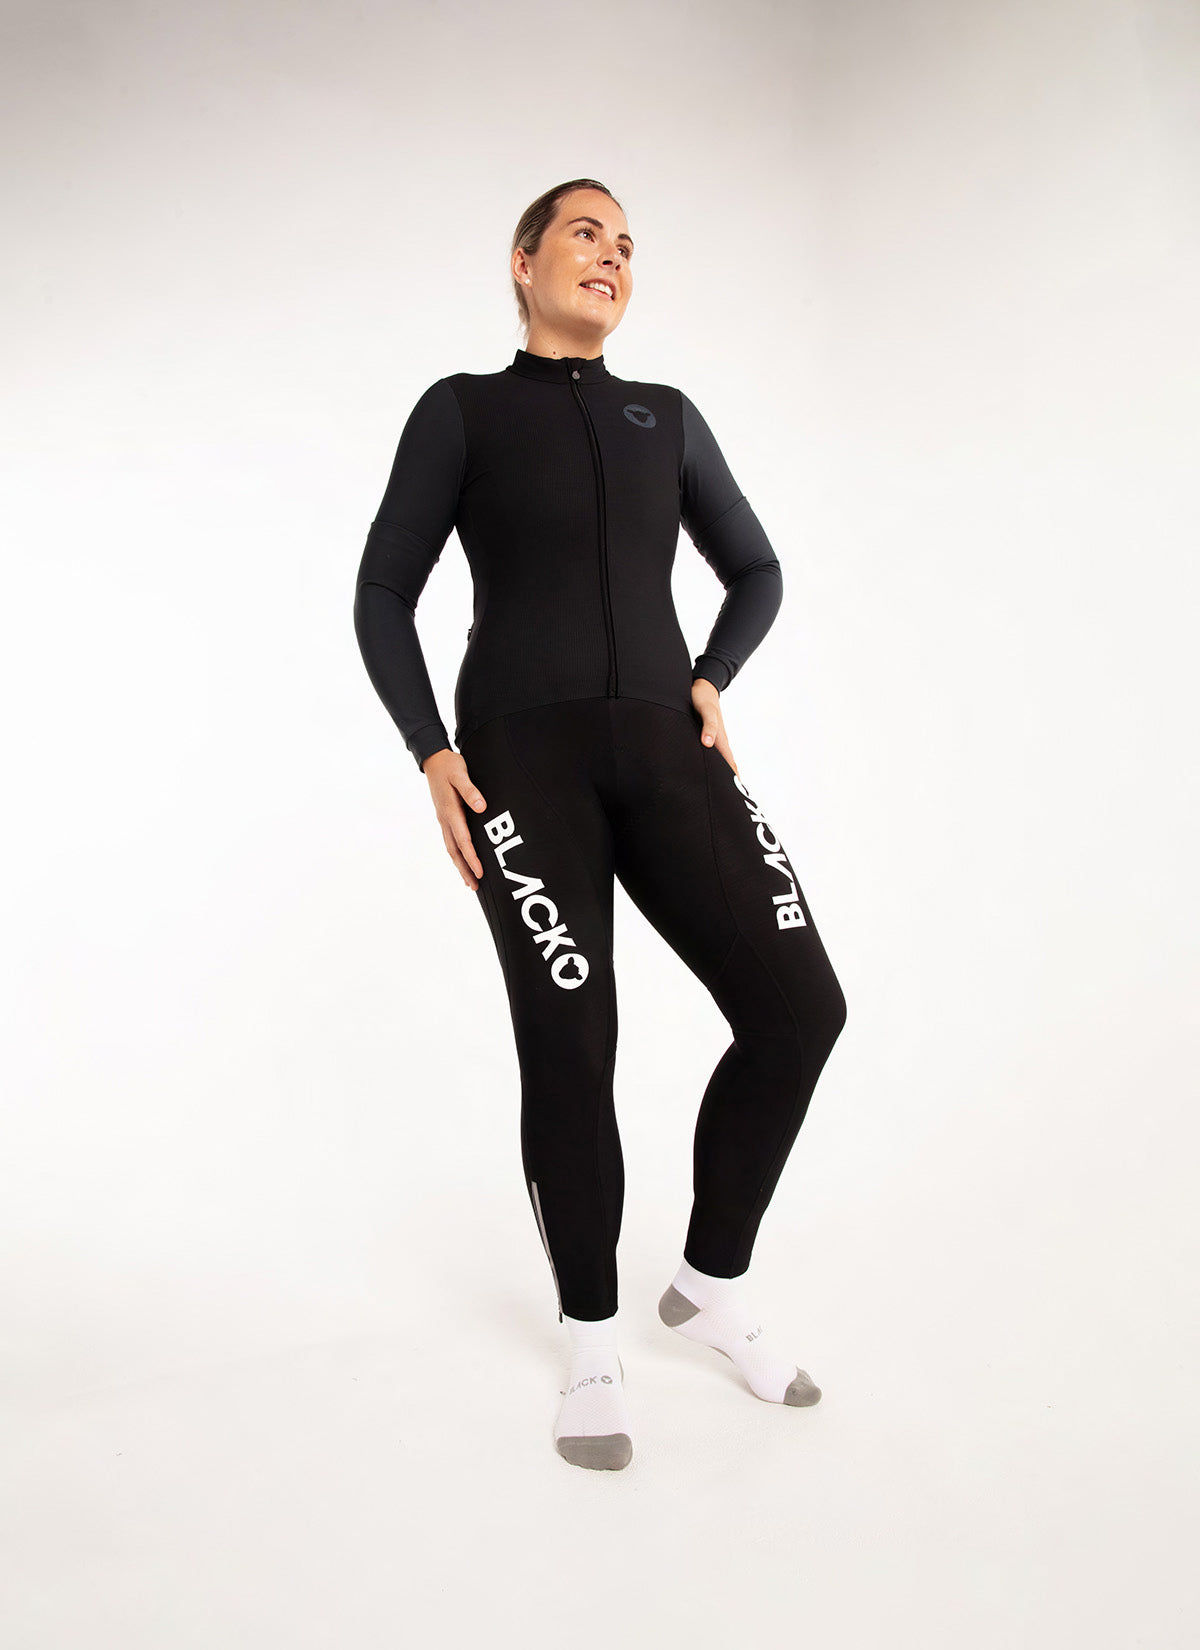 Women's Elements LS Thermal Jersey - Signature Graphite